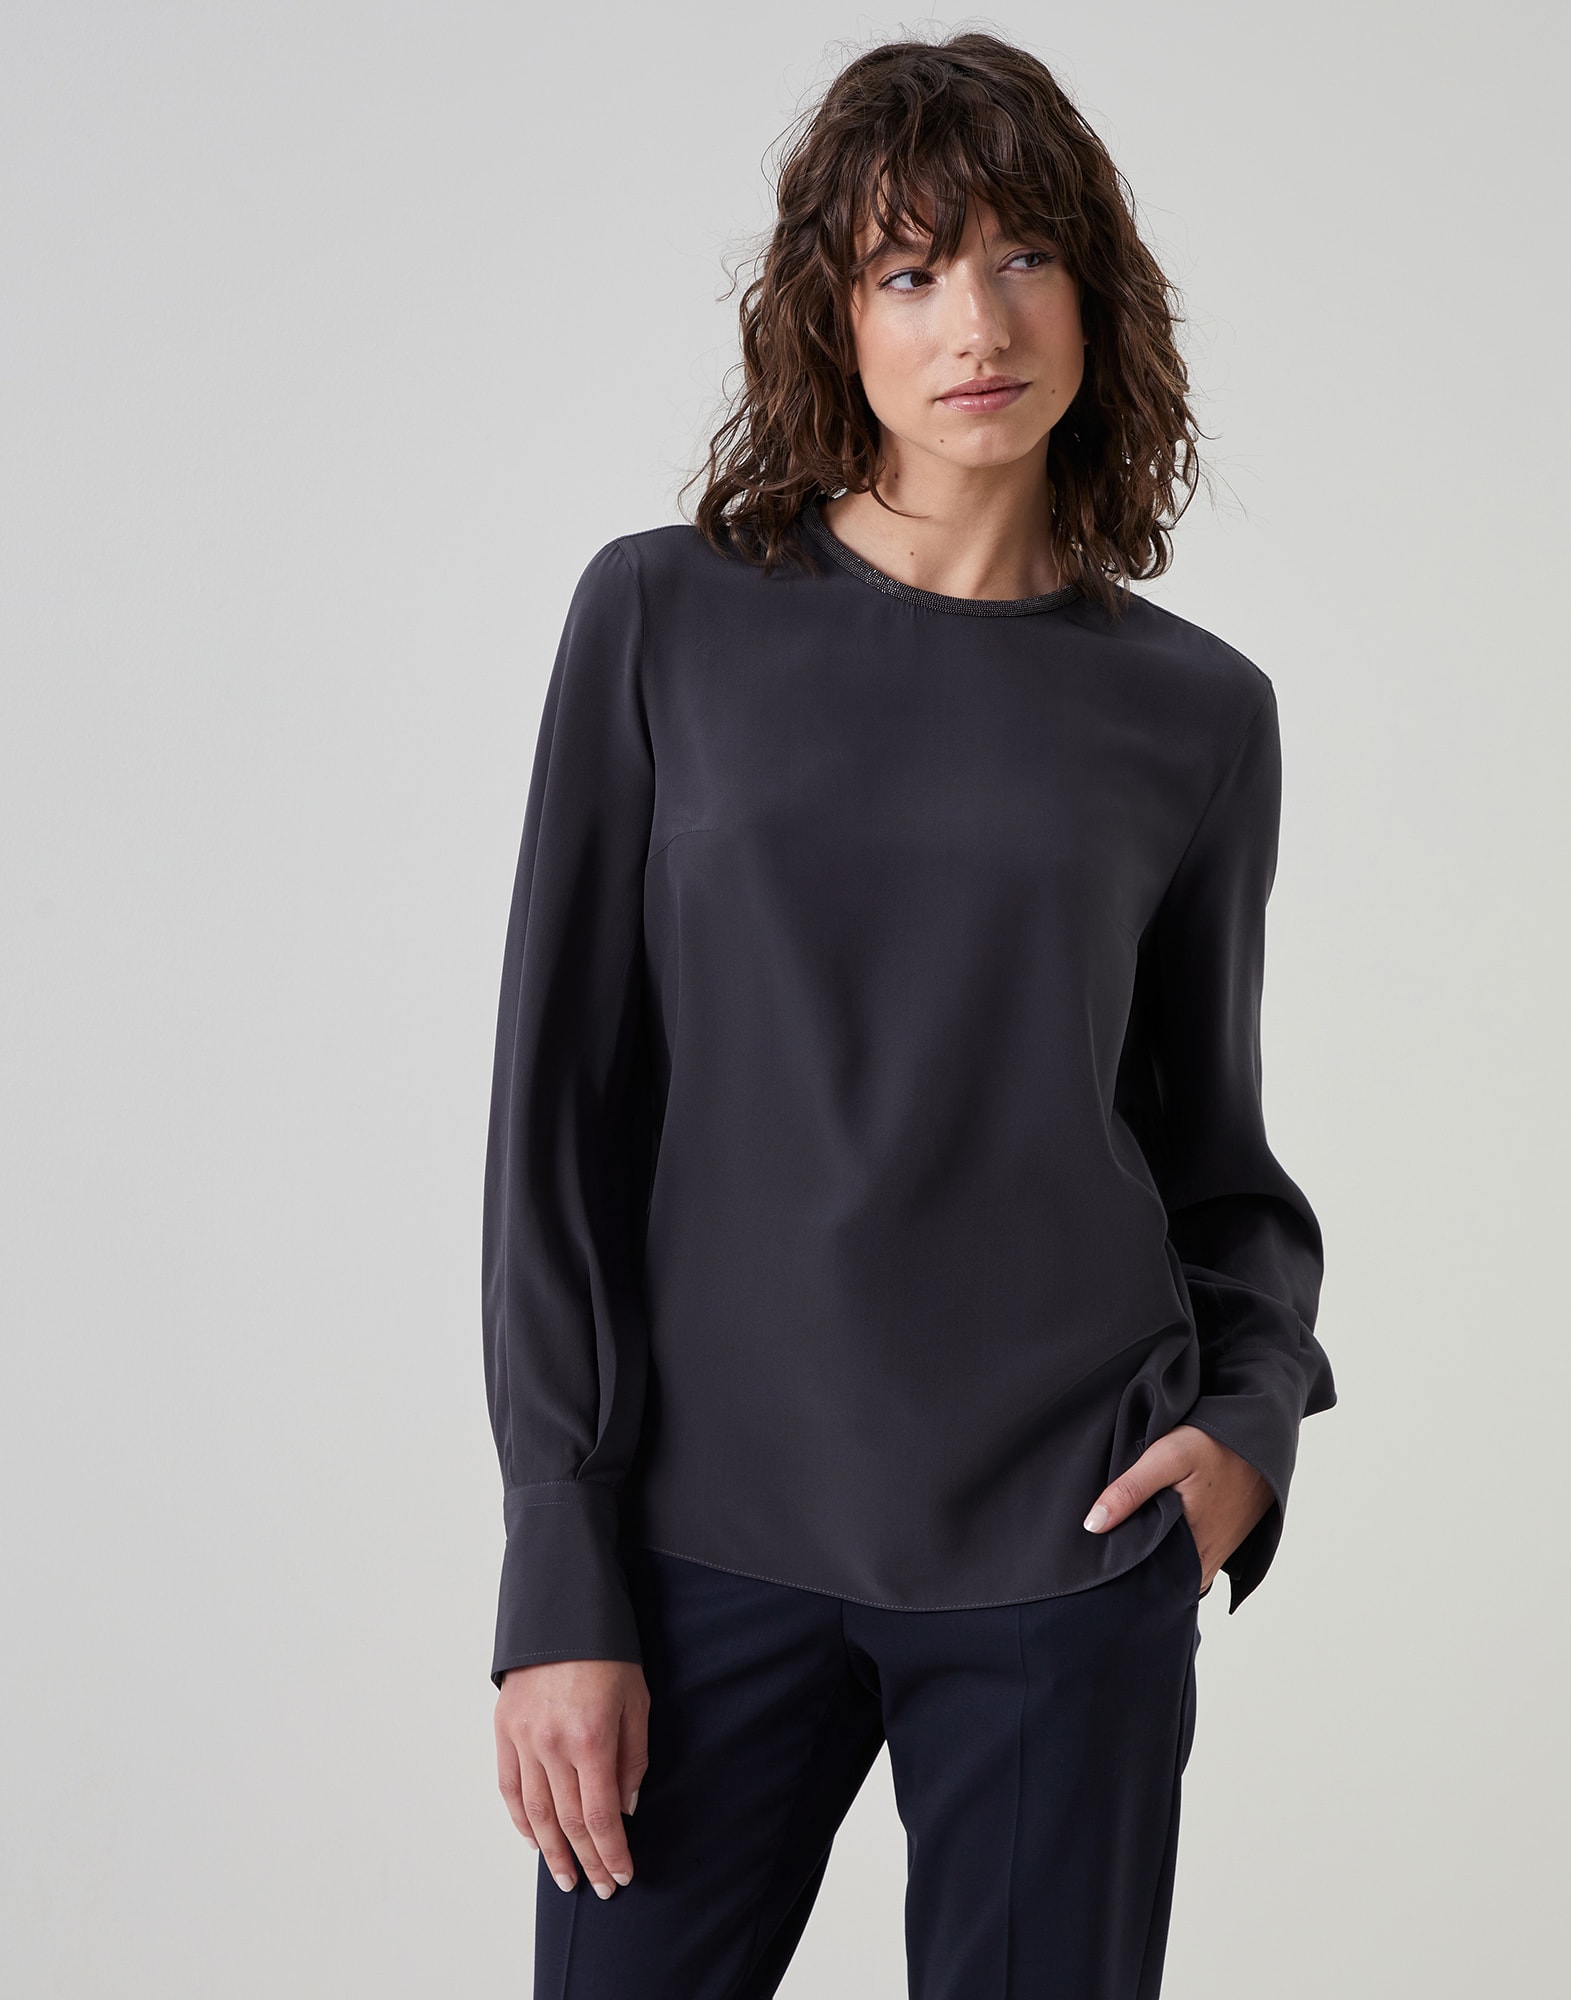 Long Sleeve T-Shirt - Front view